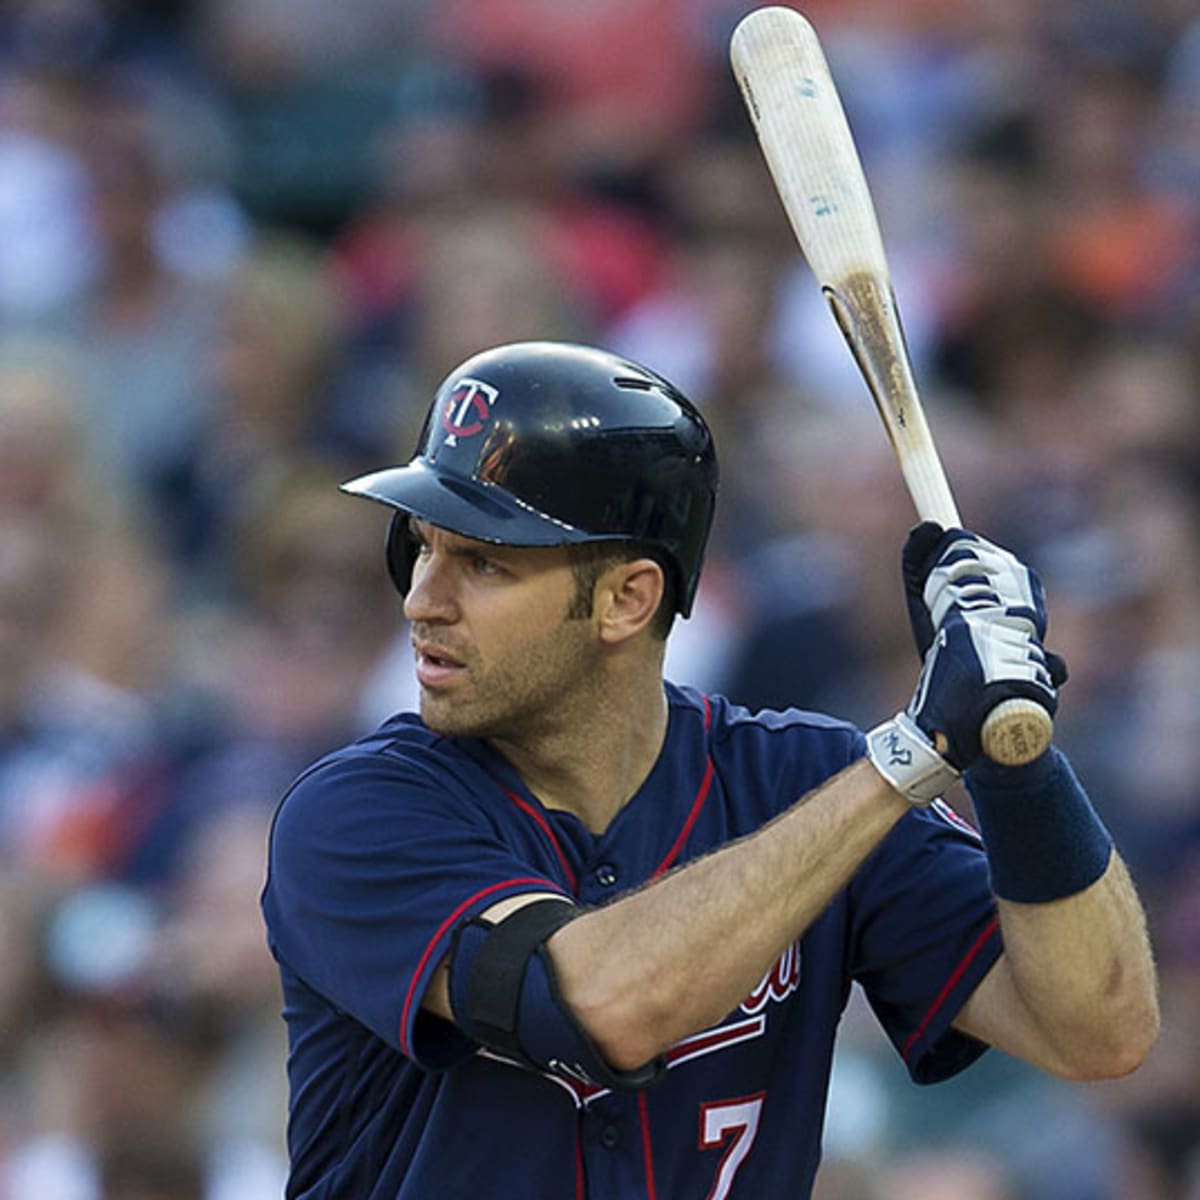 Paul Molitor Must Ignite the Twins to Win